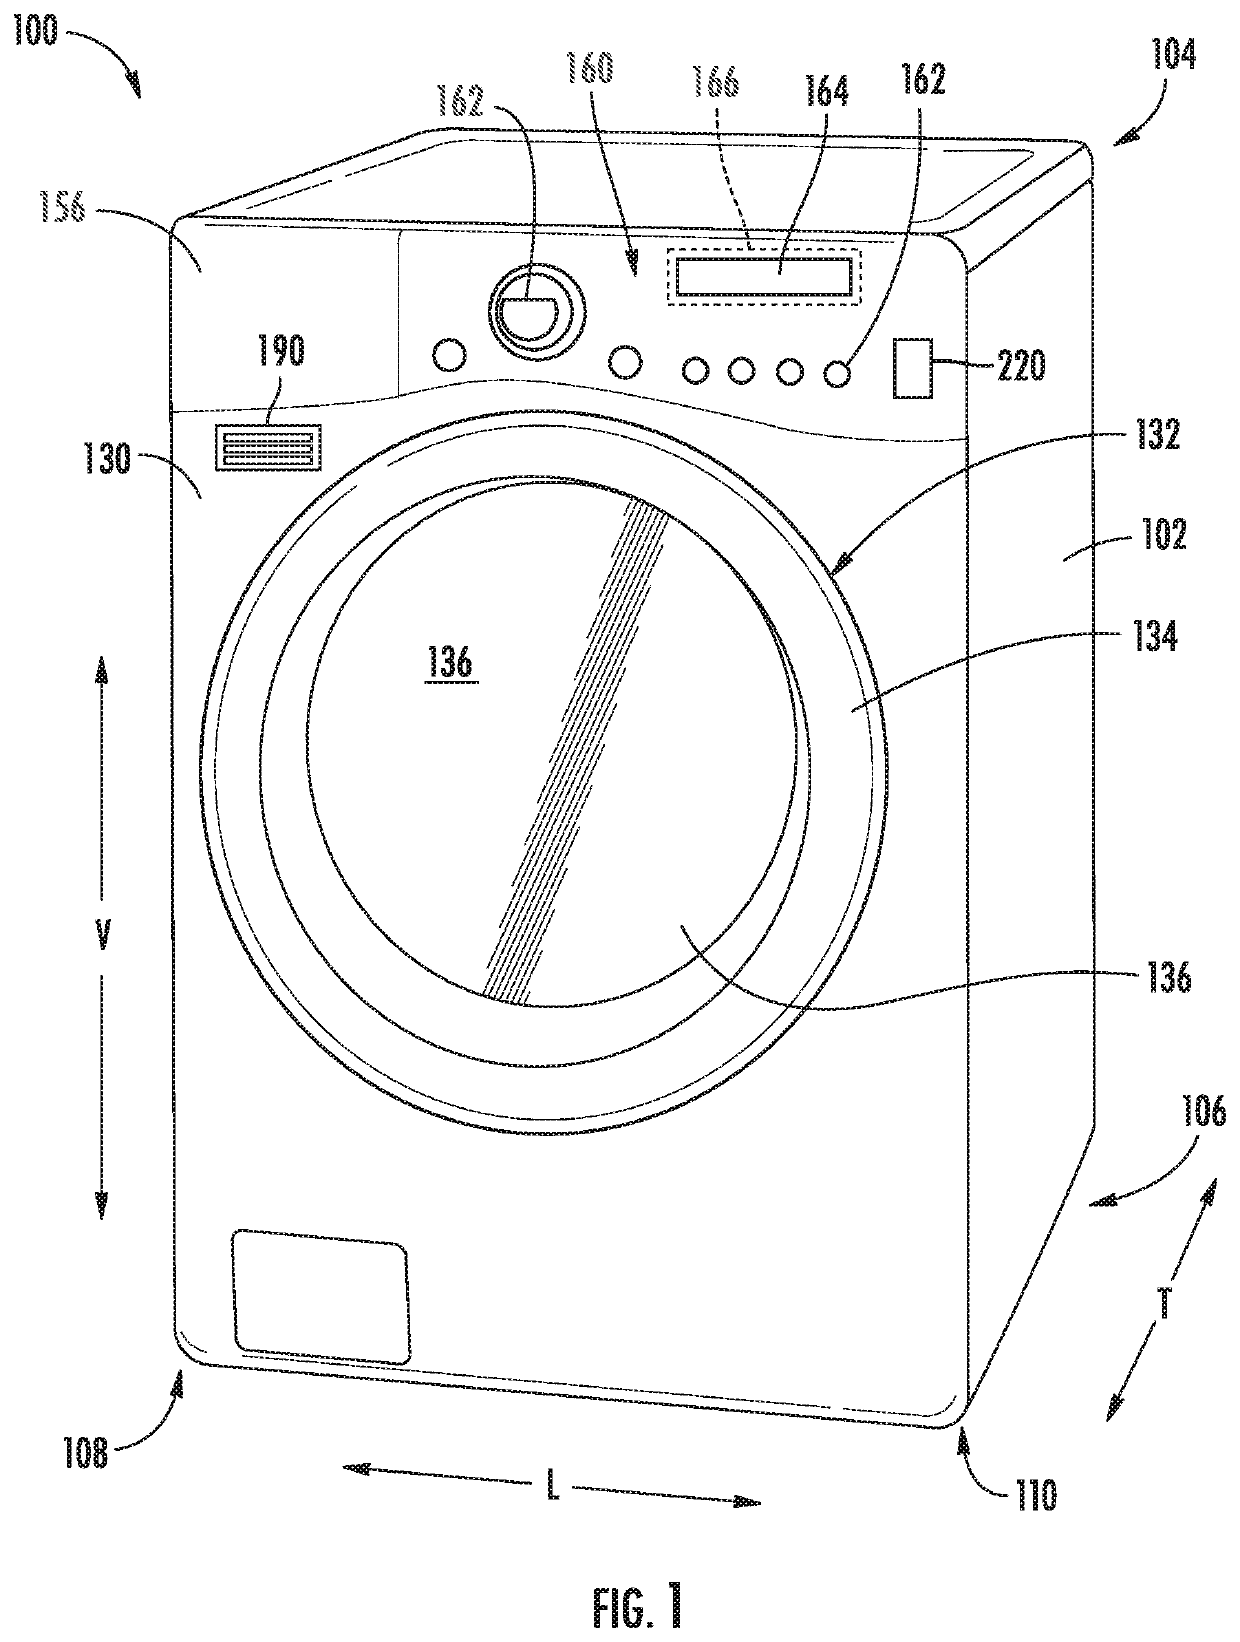 System and method for lowering humidity within a washing machine appliance